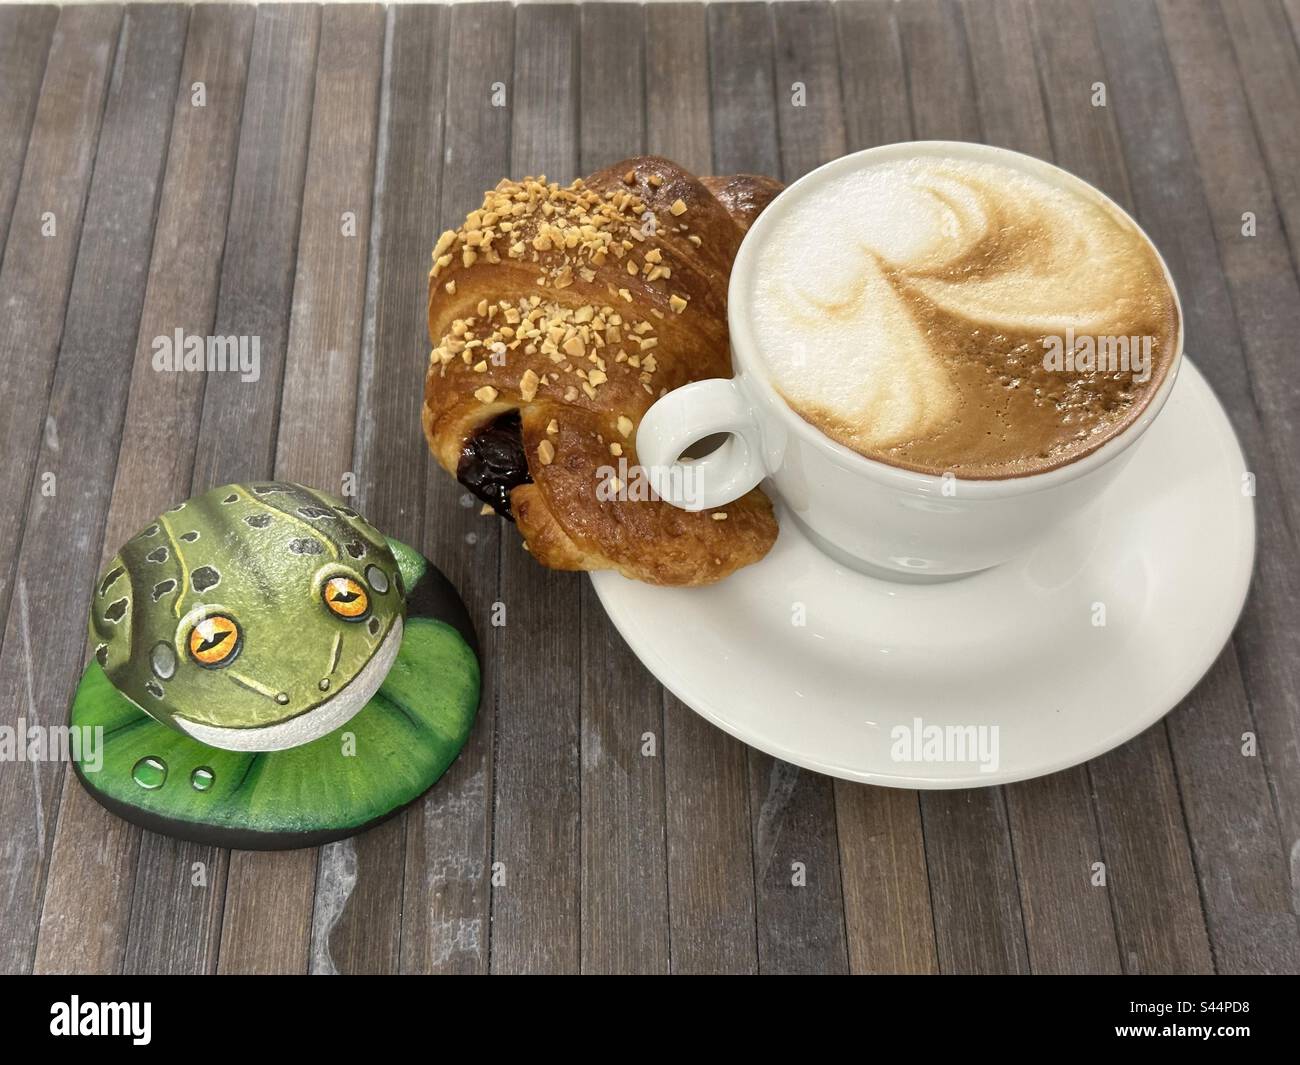 Italian breakfast with a hand painted stone frog Stock Photo